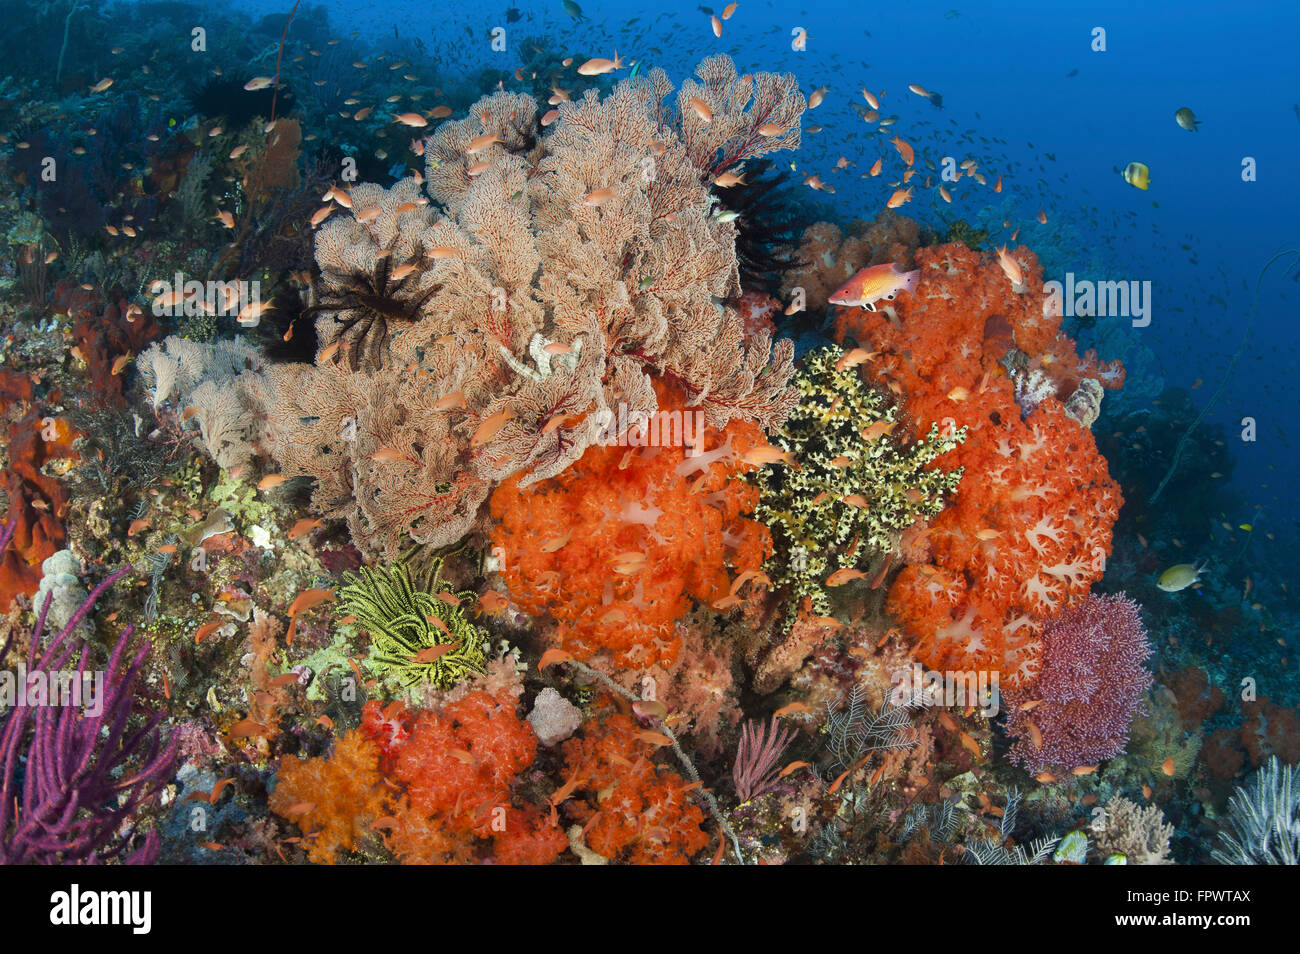 Bright sponges, soft corals and crinoids in a colorful Komodo seascape, Komodo National Park, Indonesia. Stock Photo